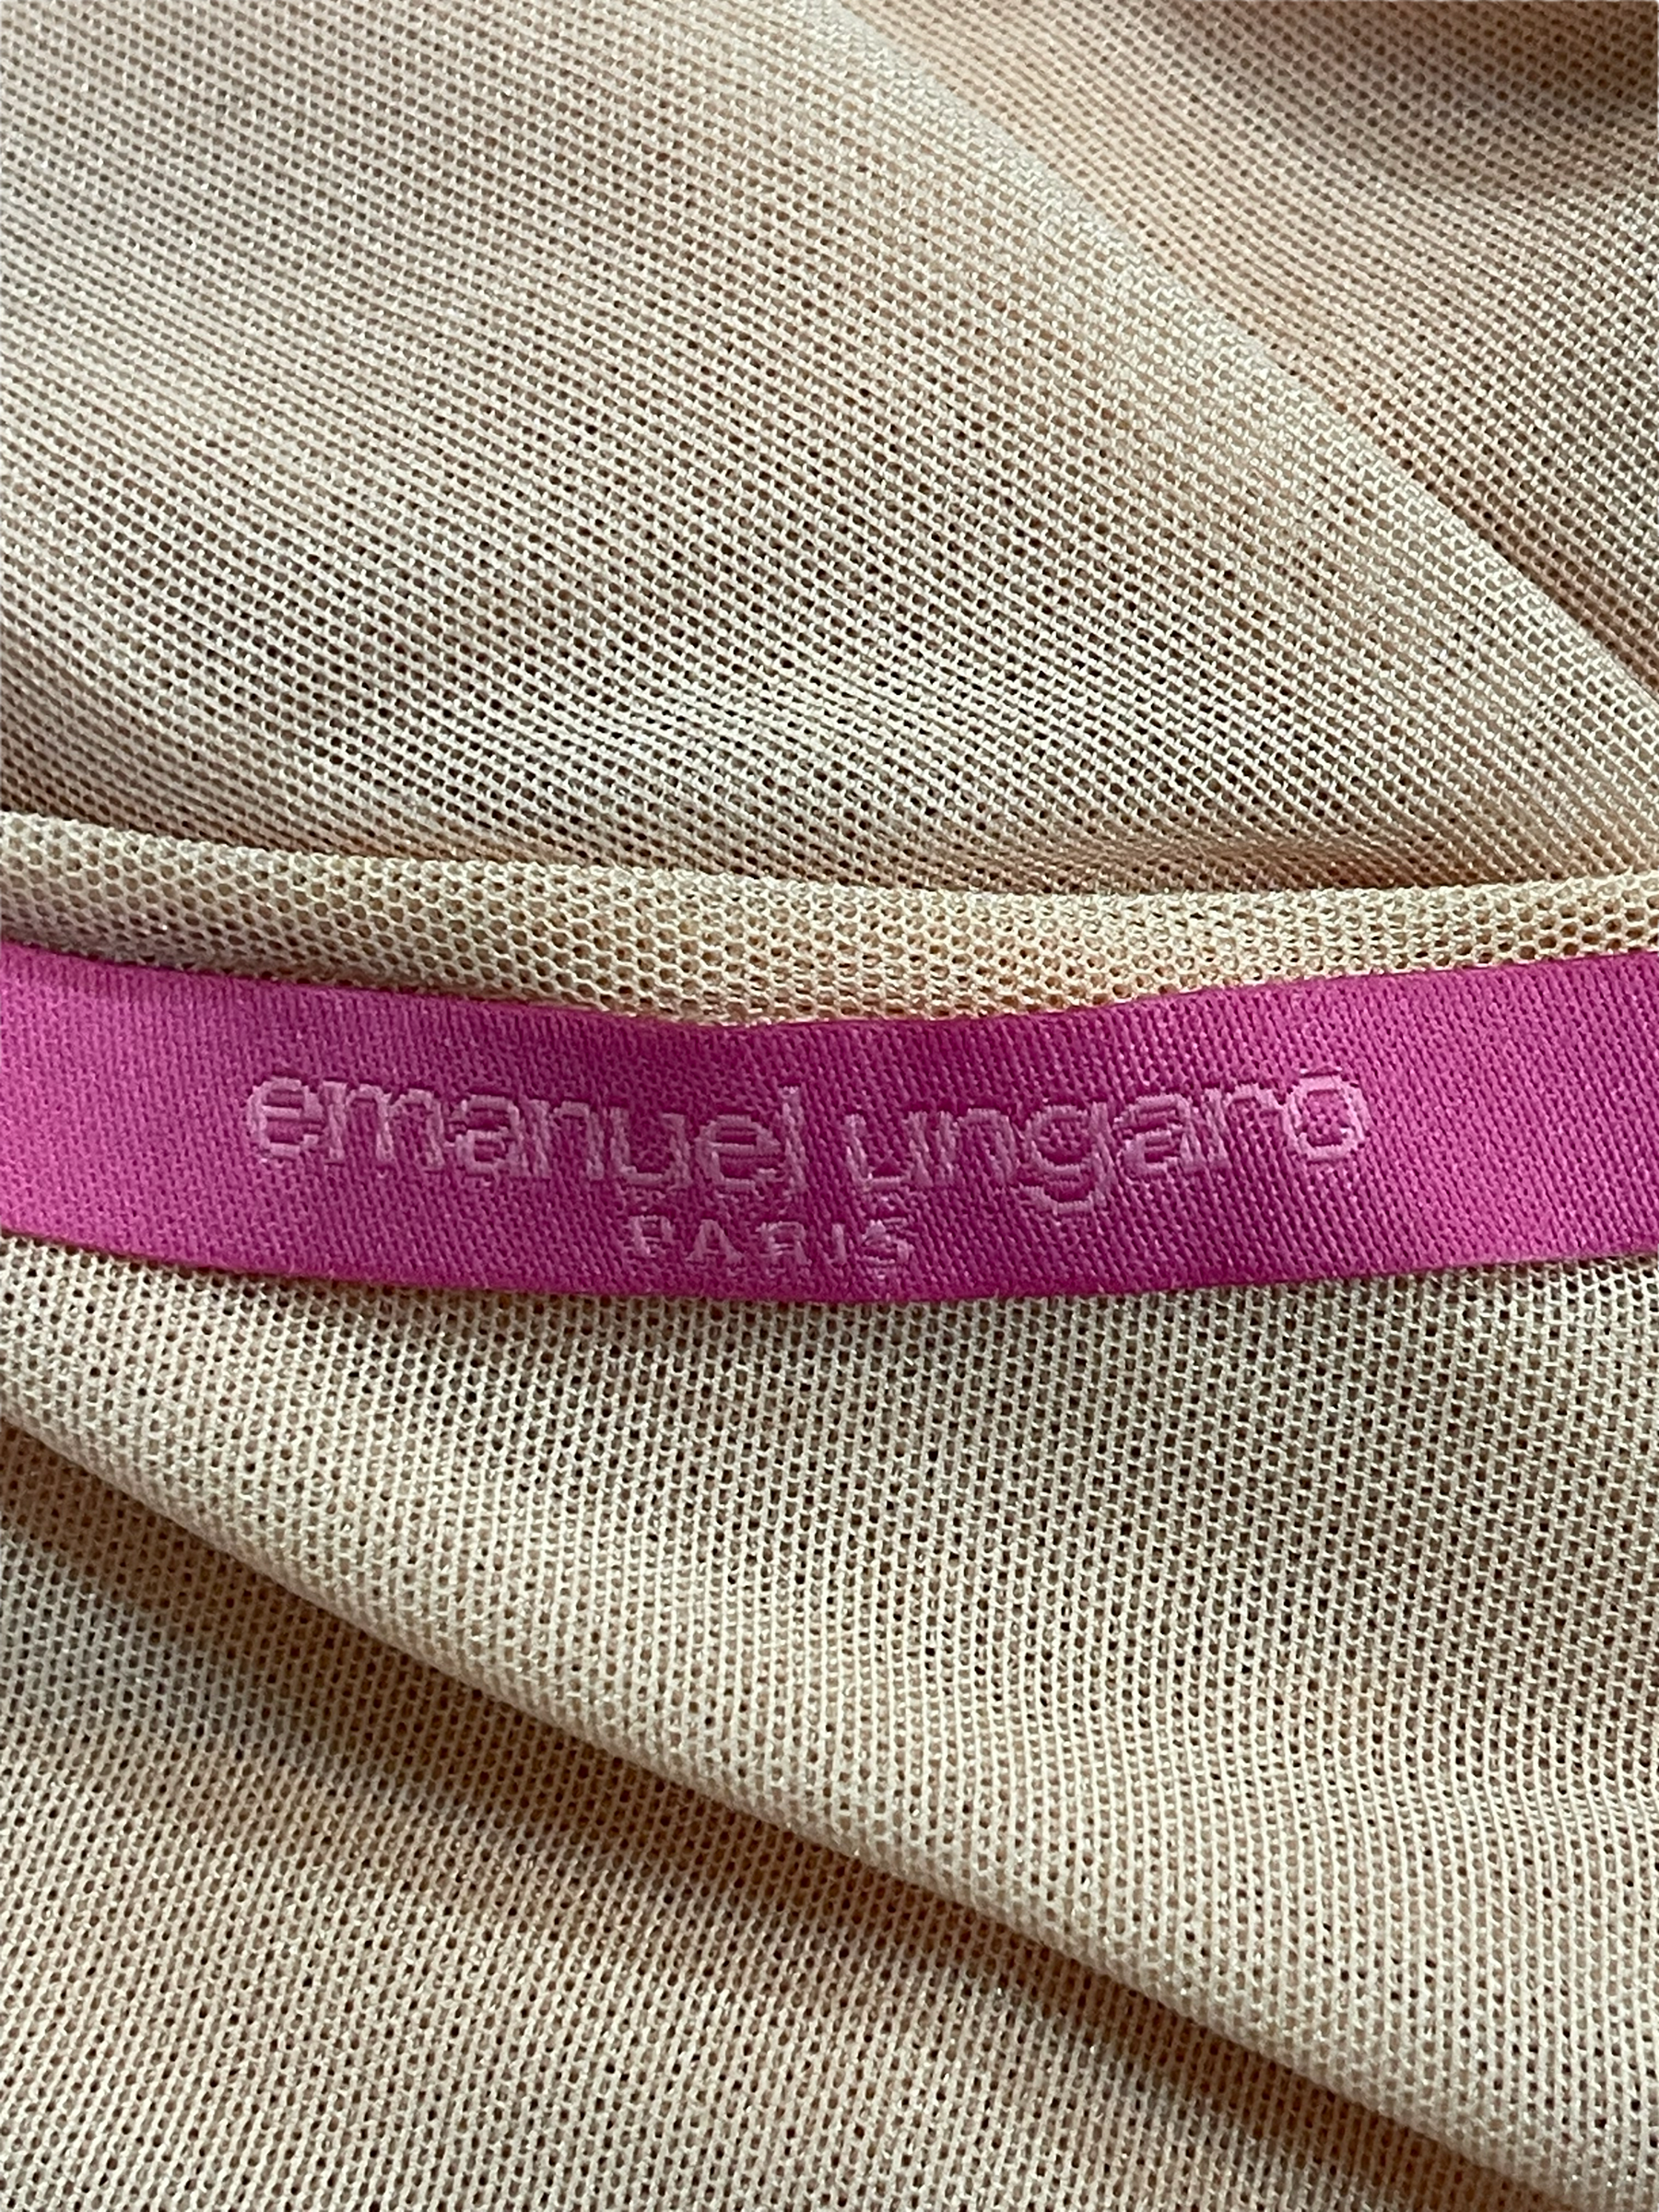 Emanuel Ungaro Early 2000s Pink Tank with oversized Rhinestone Flowers LABEL 5 of 5